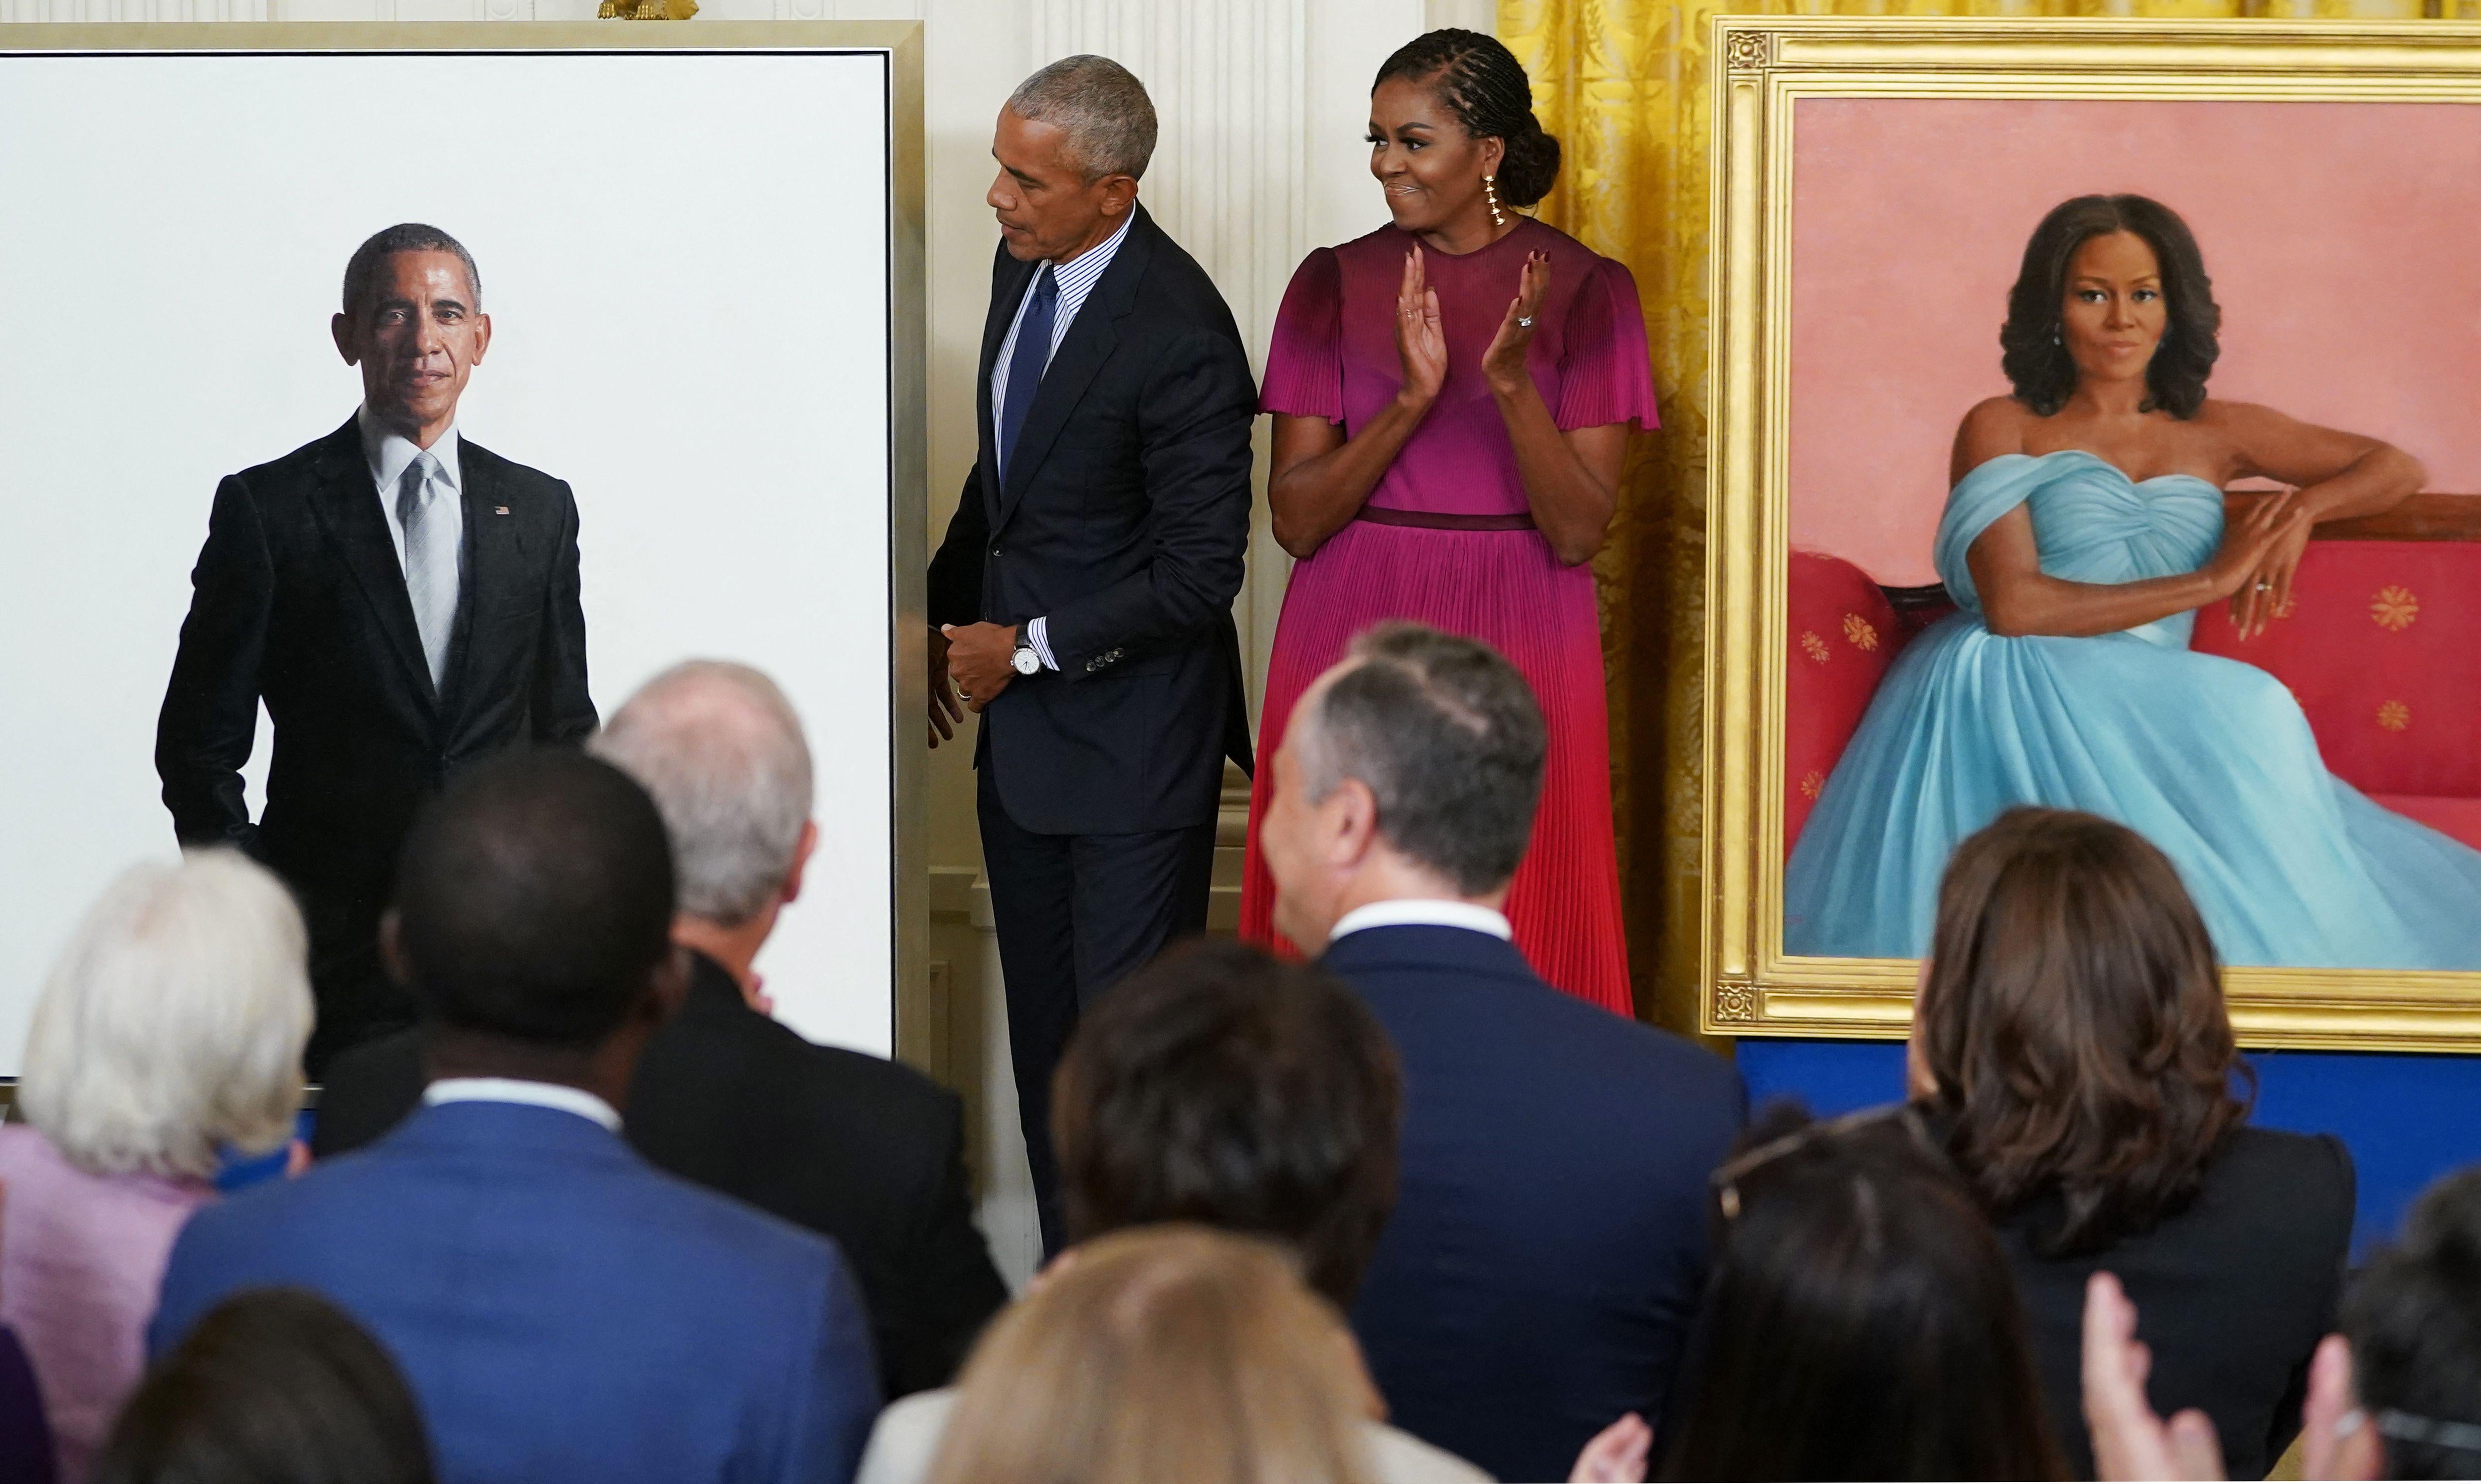 Barack Obama and Michelle Obama look at Barack Obama's official White House portrait, a photorealistic painting on a white background.